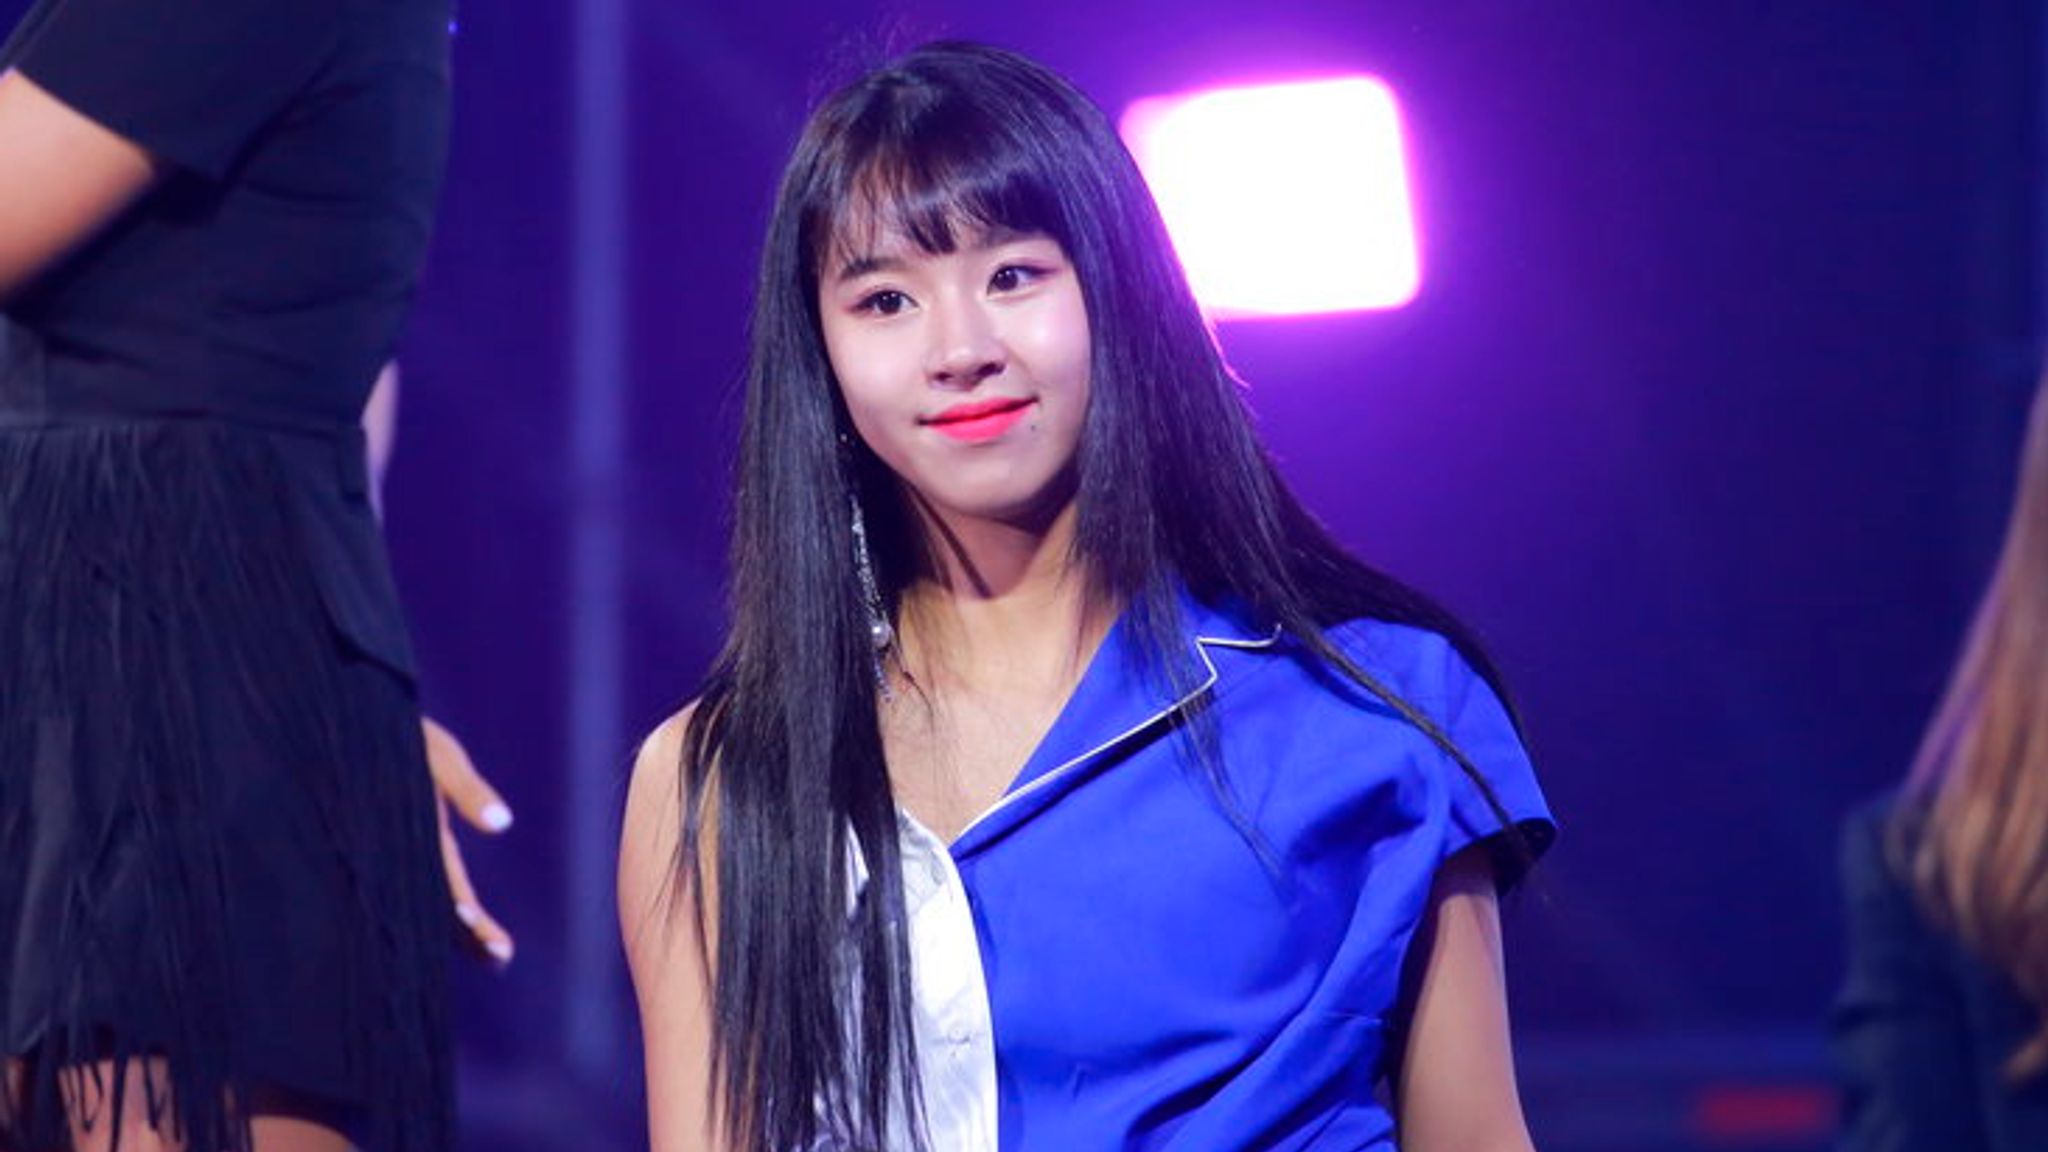 K-pop star Chaeyoung from girl band Twice issues 'sincere apology' for wearing T-shirt featuring Nazi | Ents & Arts | Sky News